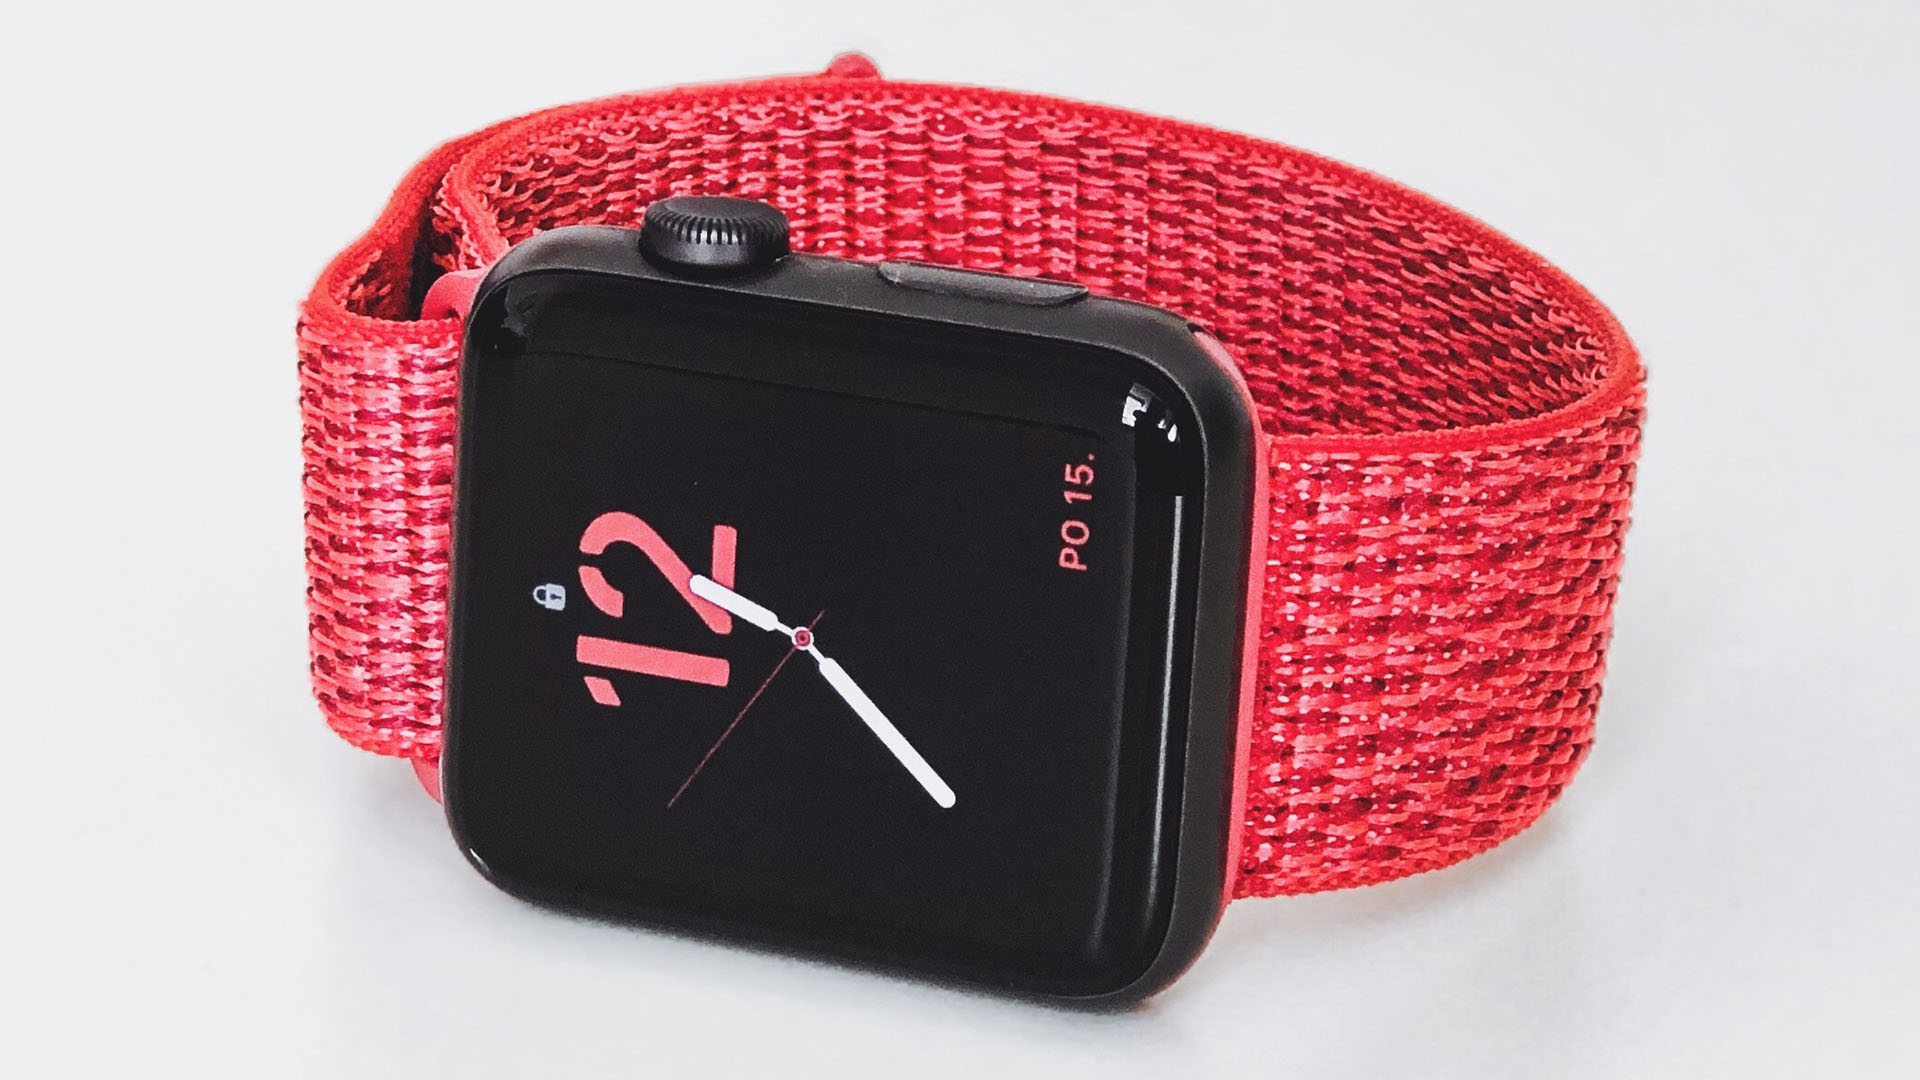 Space gray apple watch with Red Sport Loop